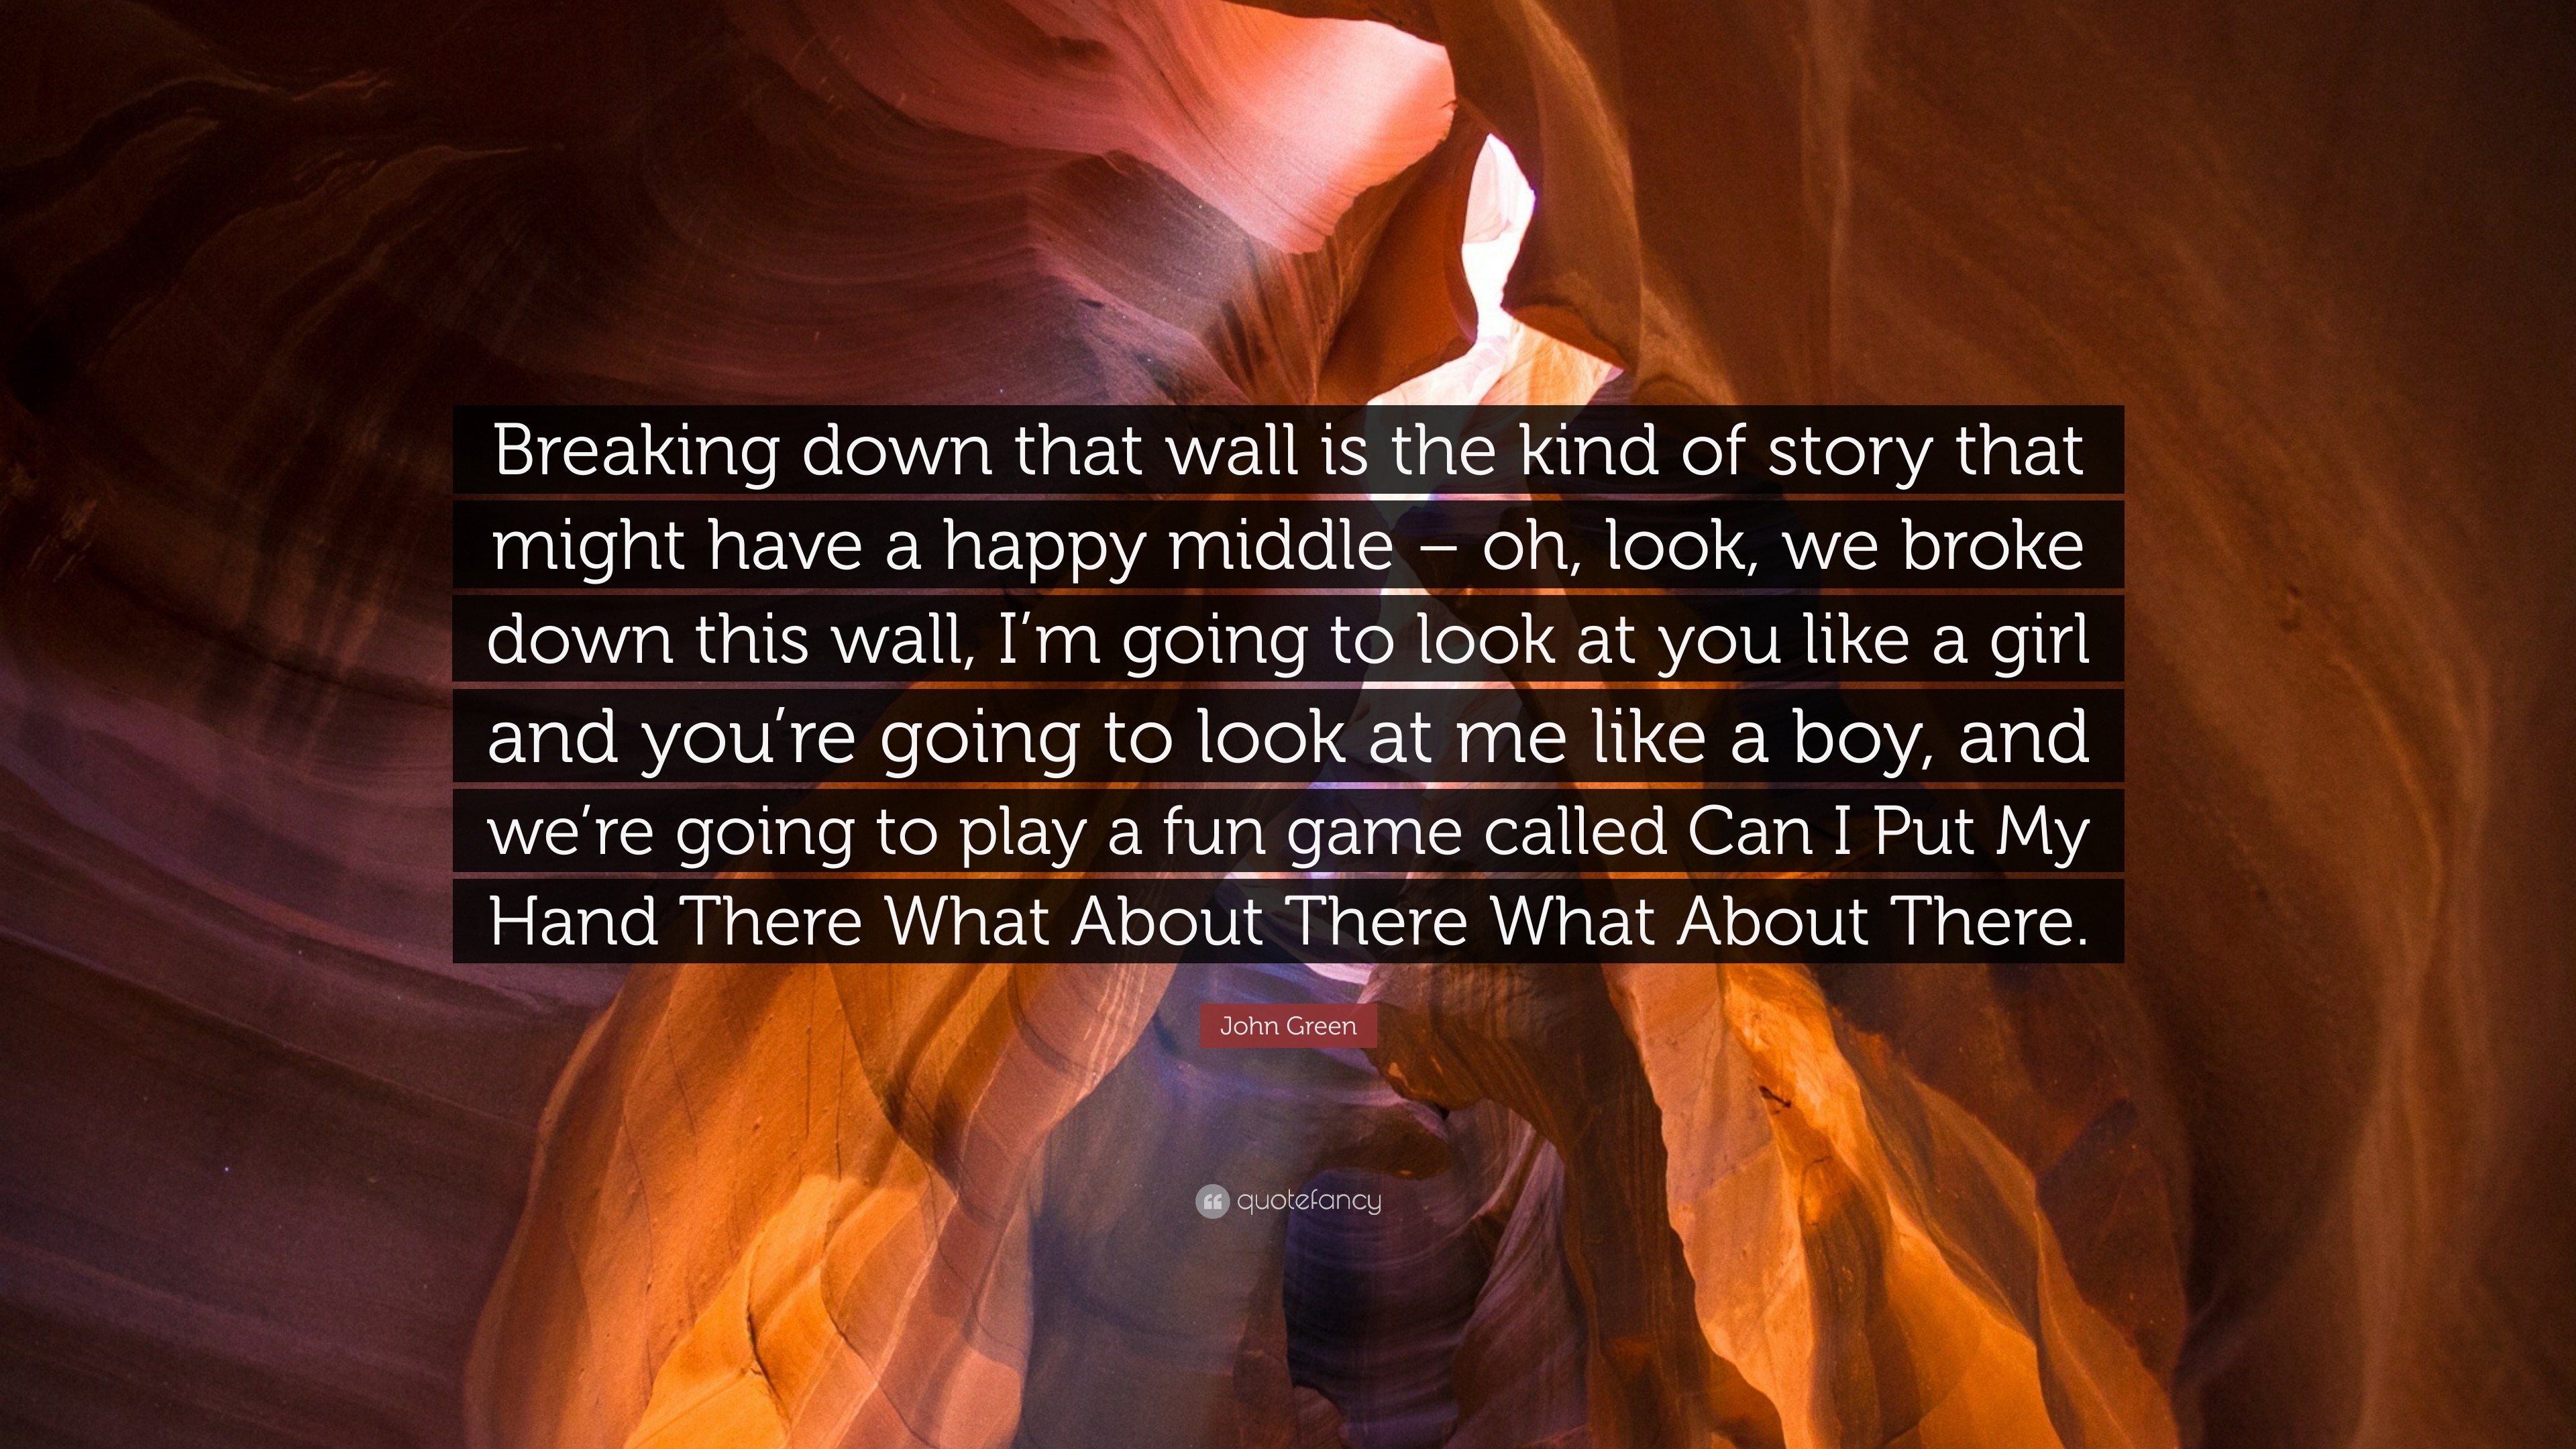 John Green Quote: “Breaking down that wall is the kind of story that